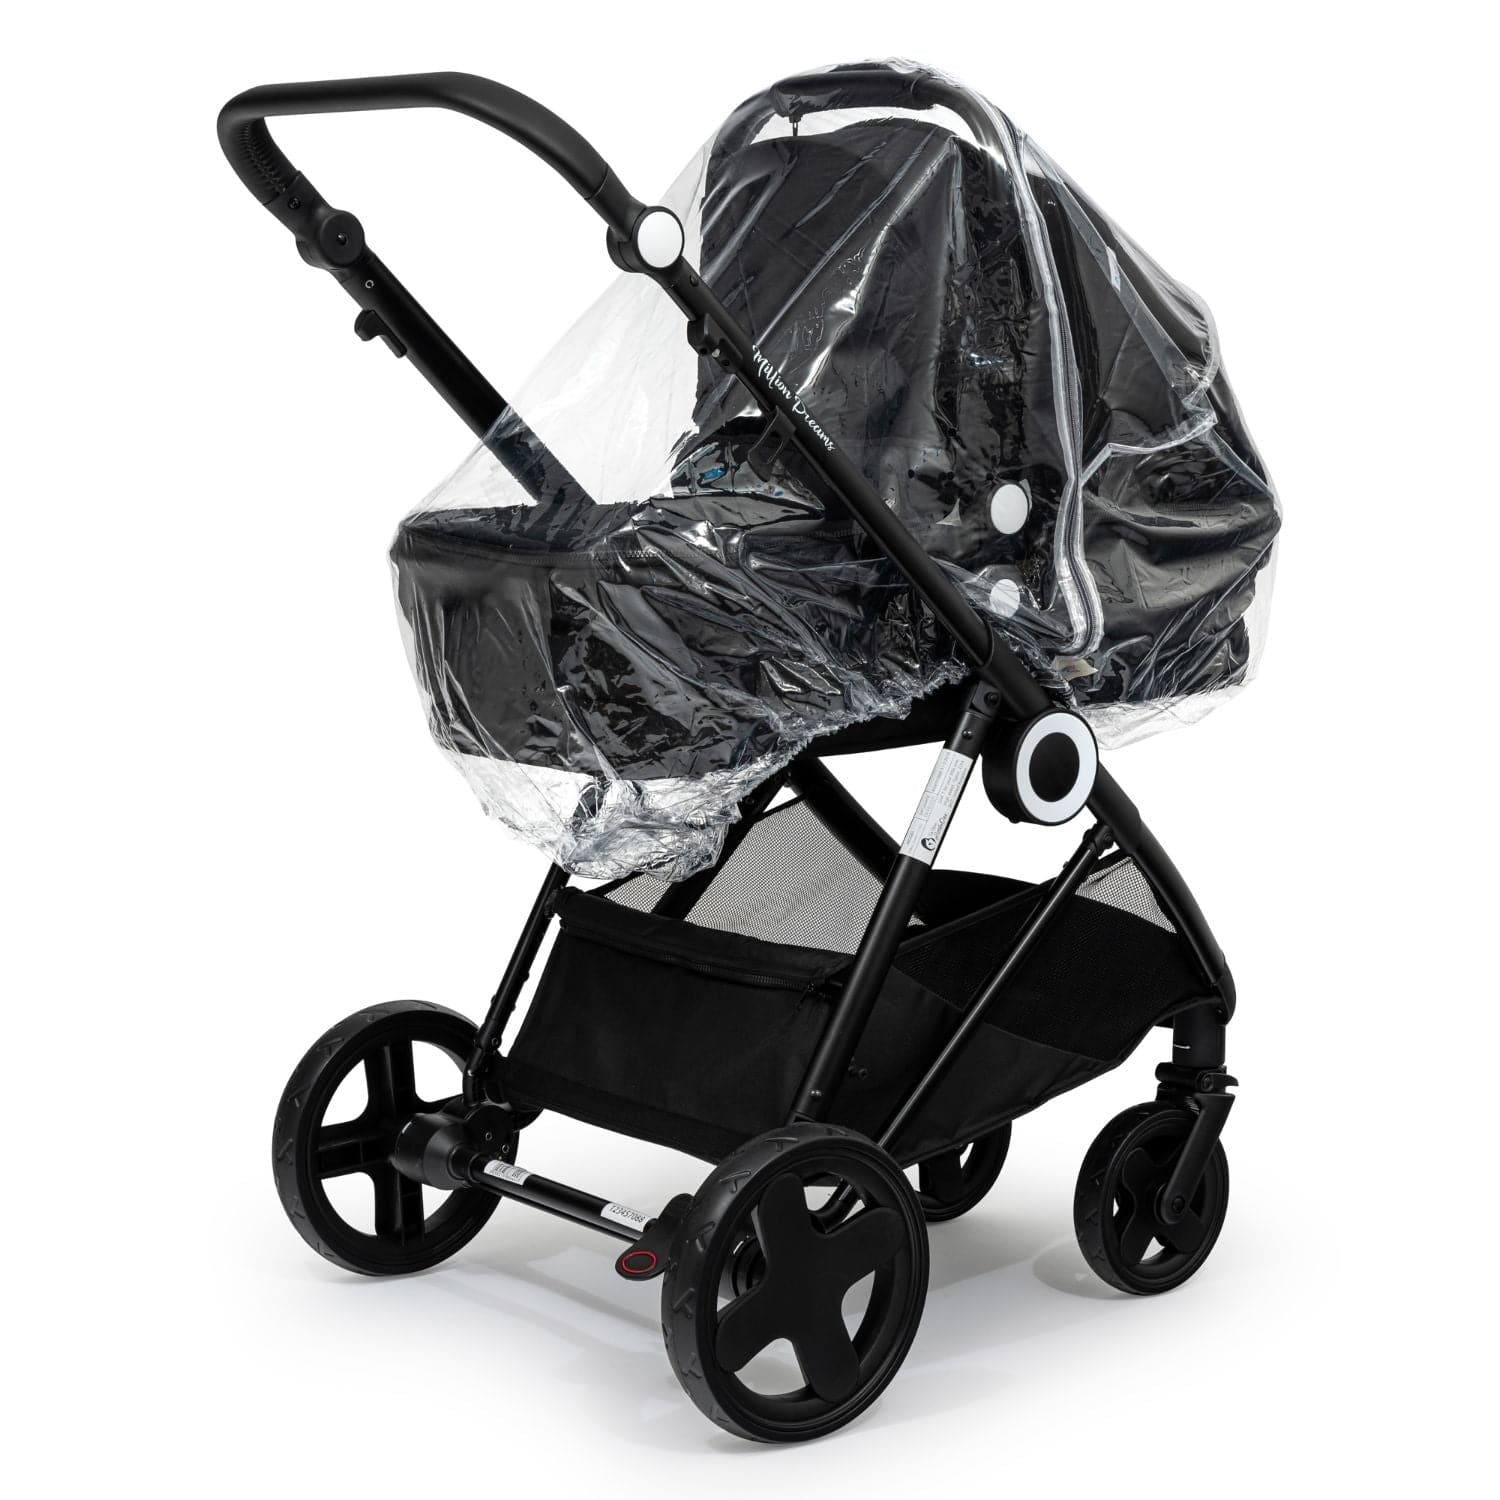 Carrycot Raincover Compatible With Cam - Fits All Models - For Your Little One